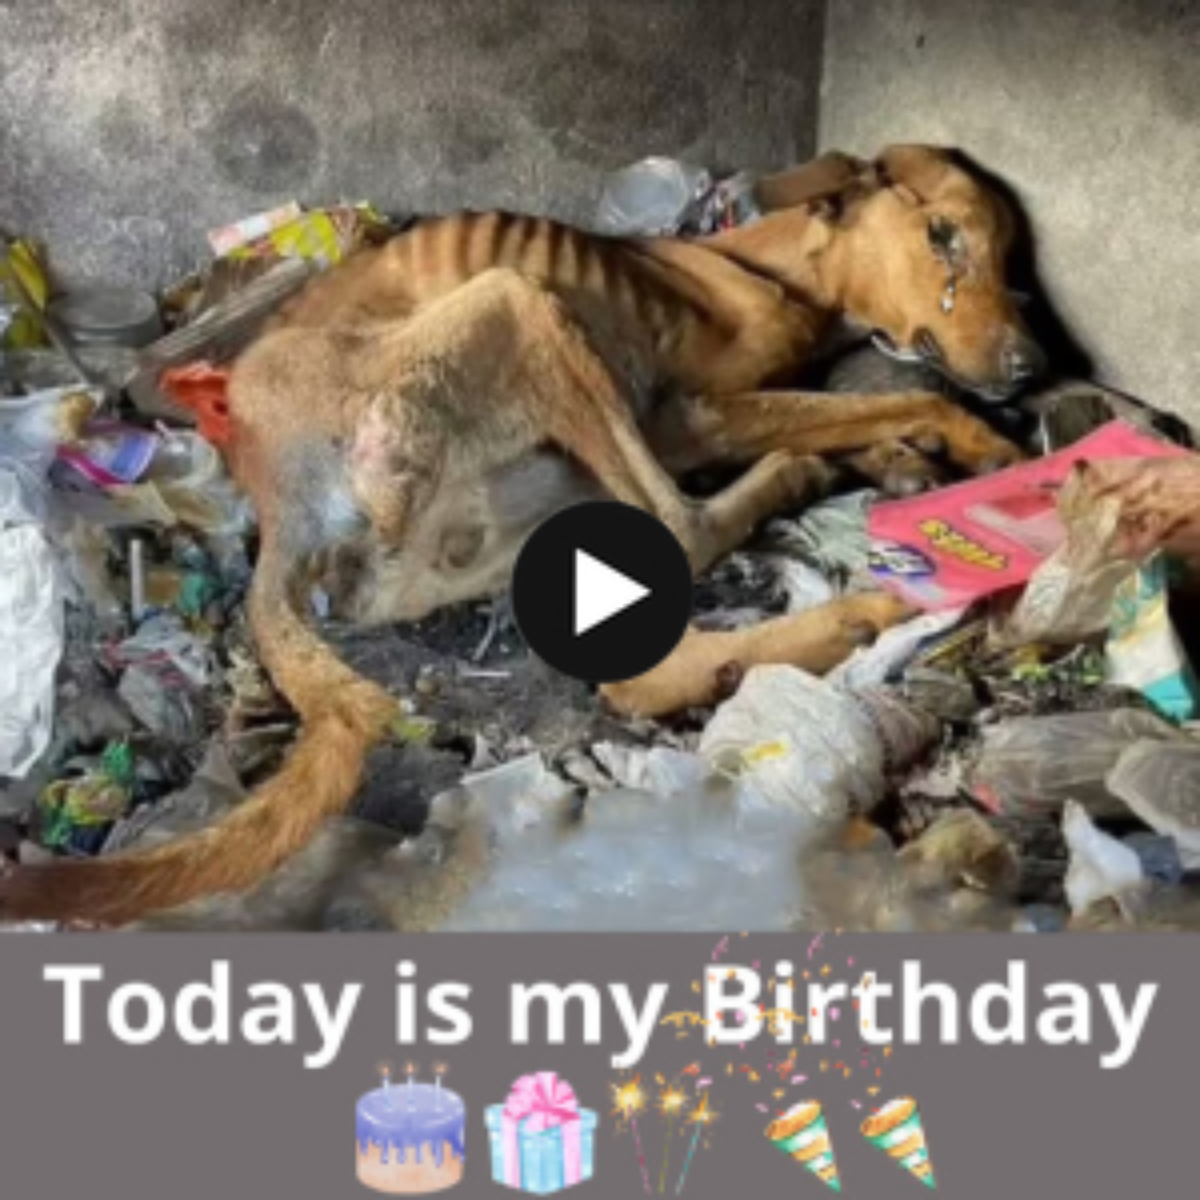 Unforgettable birthday of a poor dog (VIDEO). Hope to get a little love here